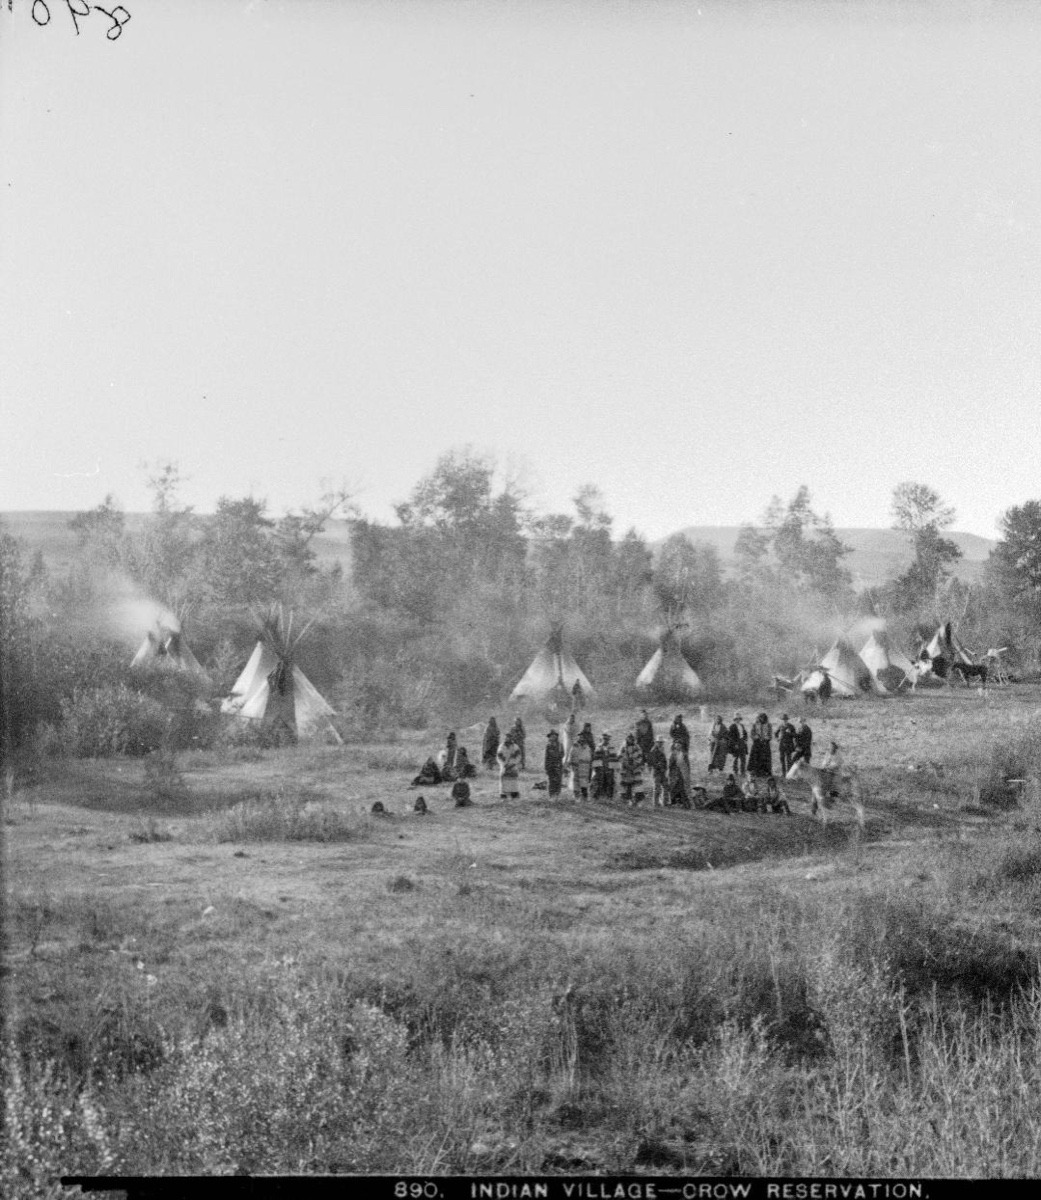 "Indian Village—Crow Reservation," 1881, by F. Jay Haynes courtesy Montana Historical Society